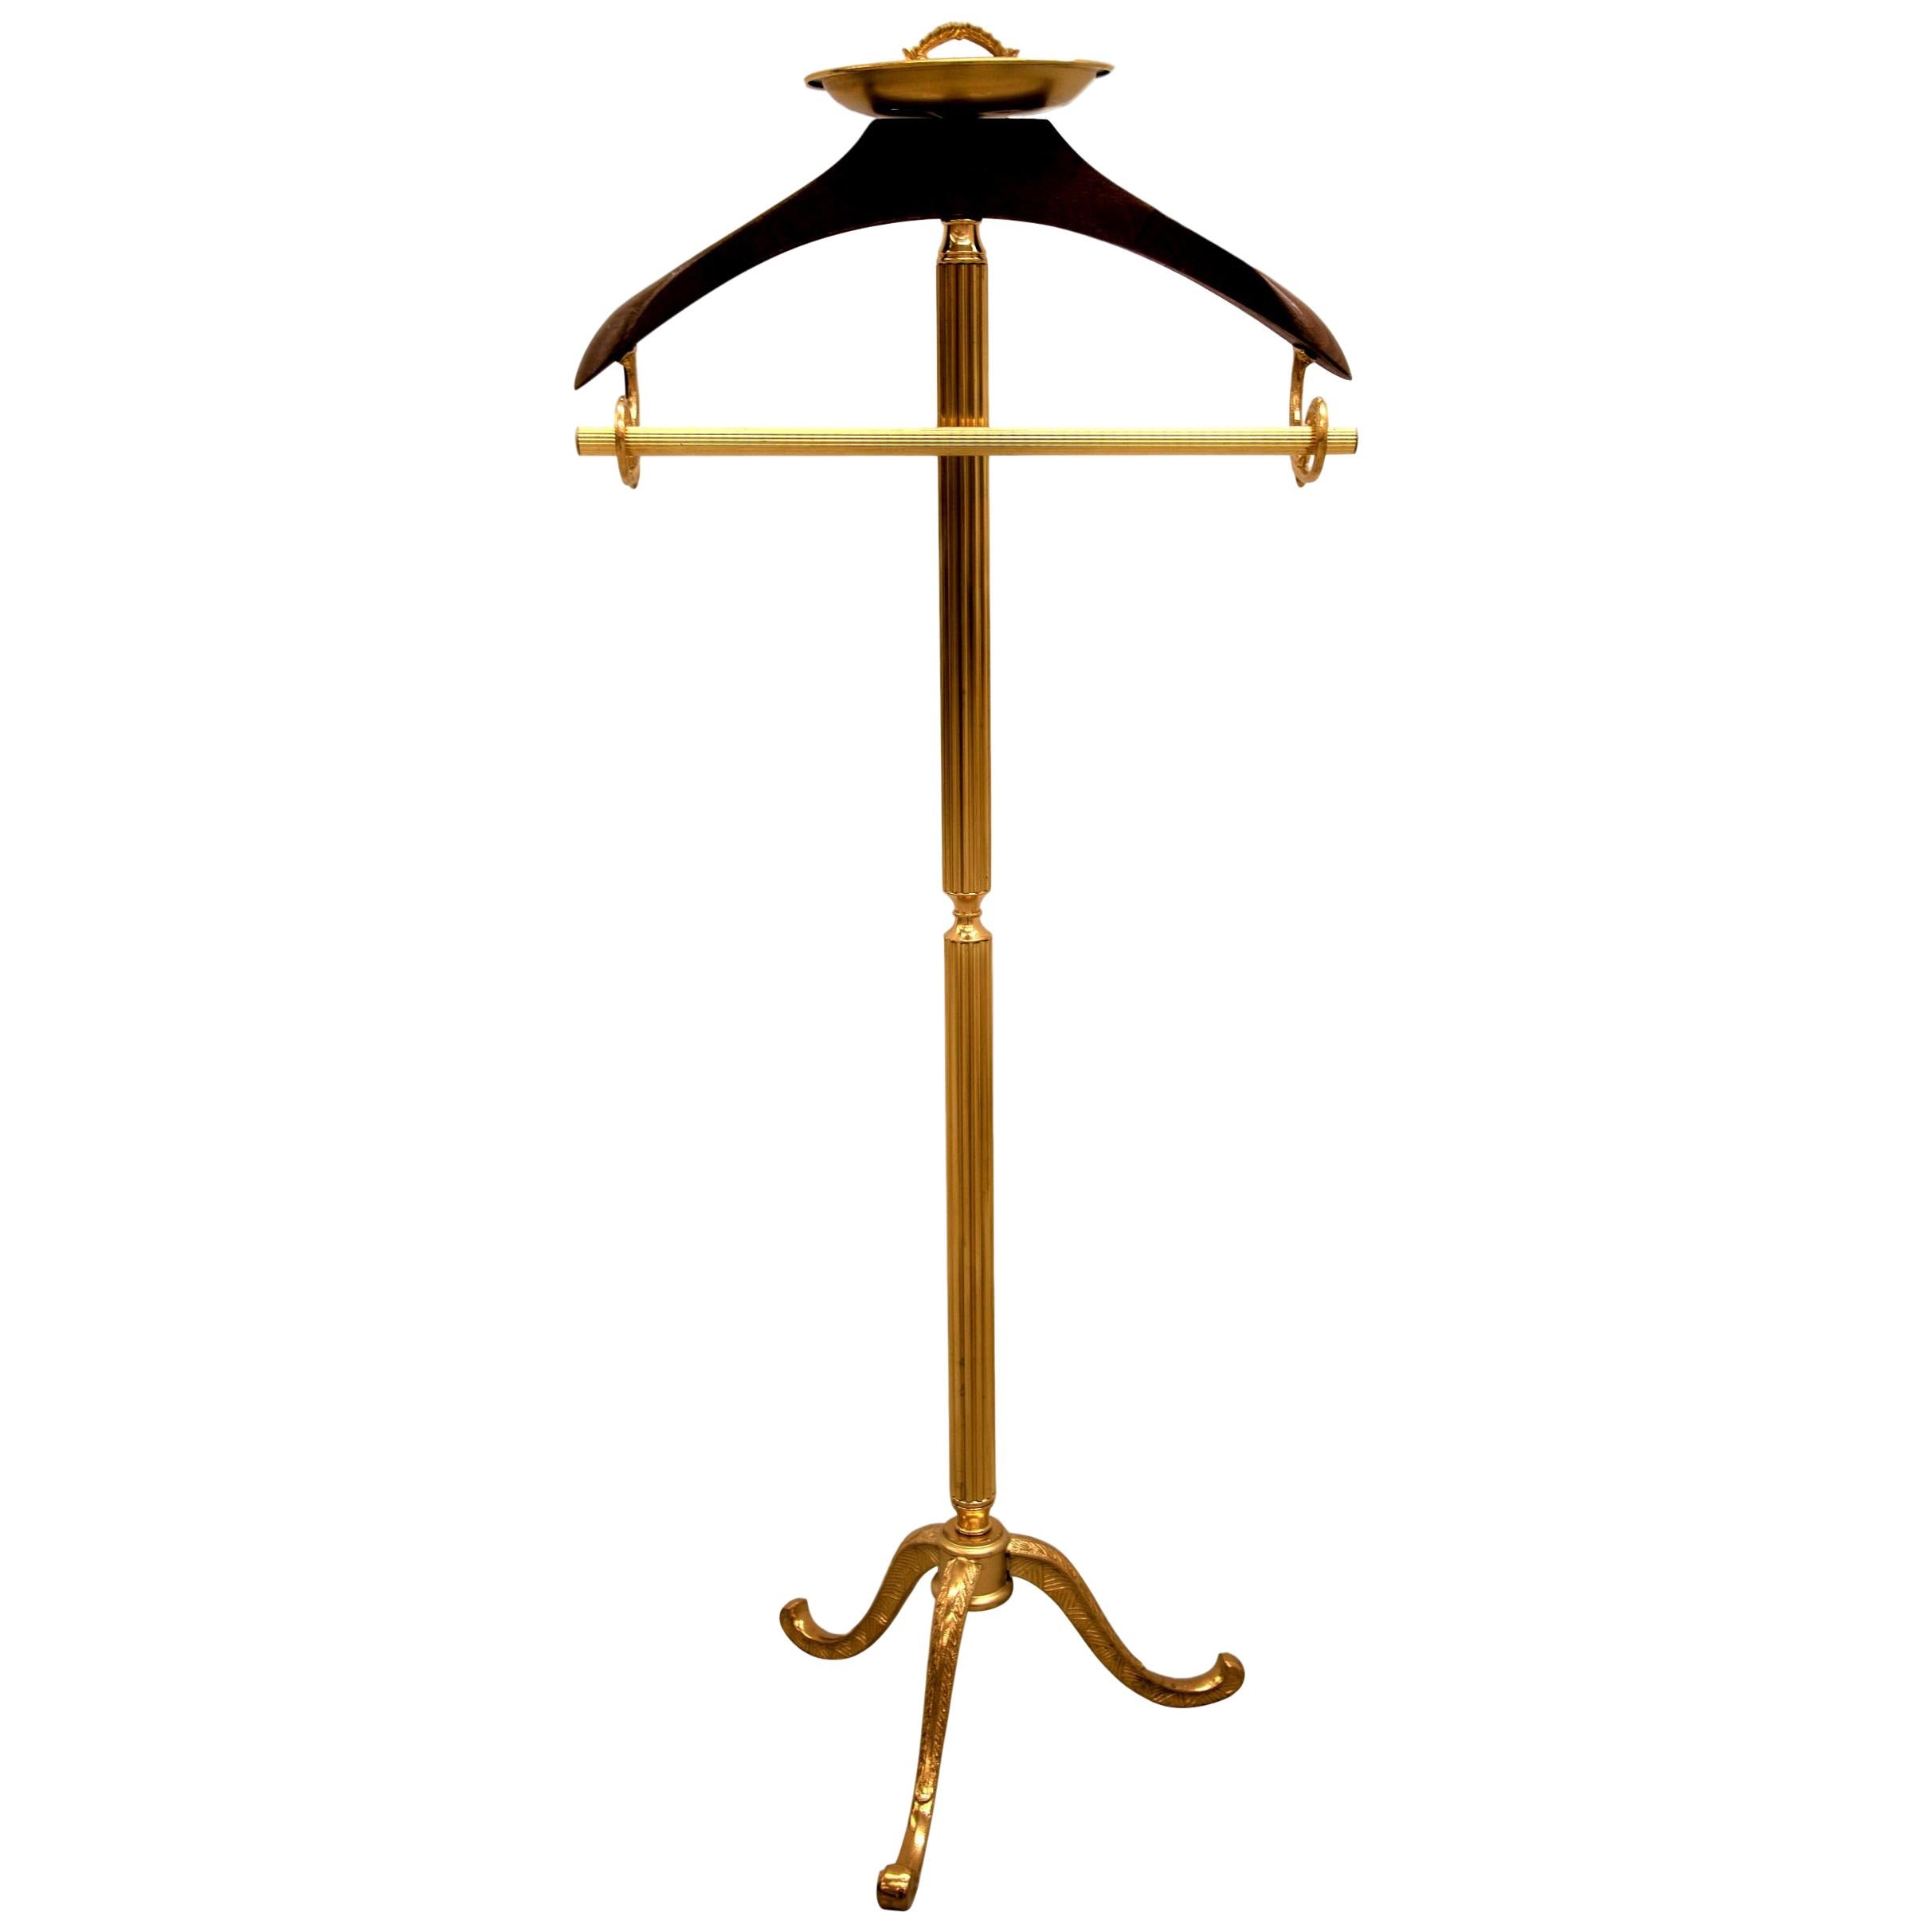 1960s Italian Midcentury Hollywood Regency Brass and Wood Valet Stand